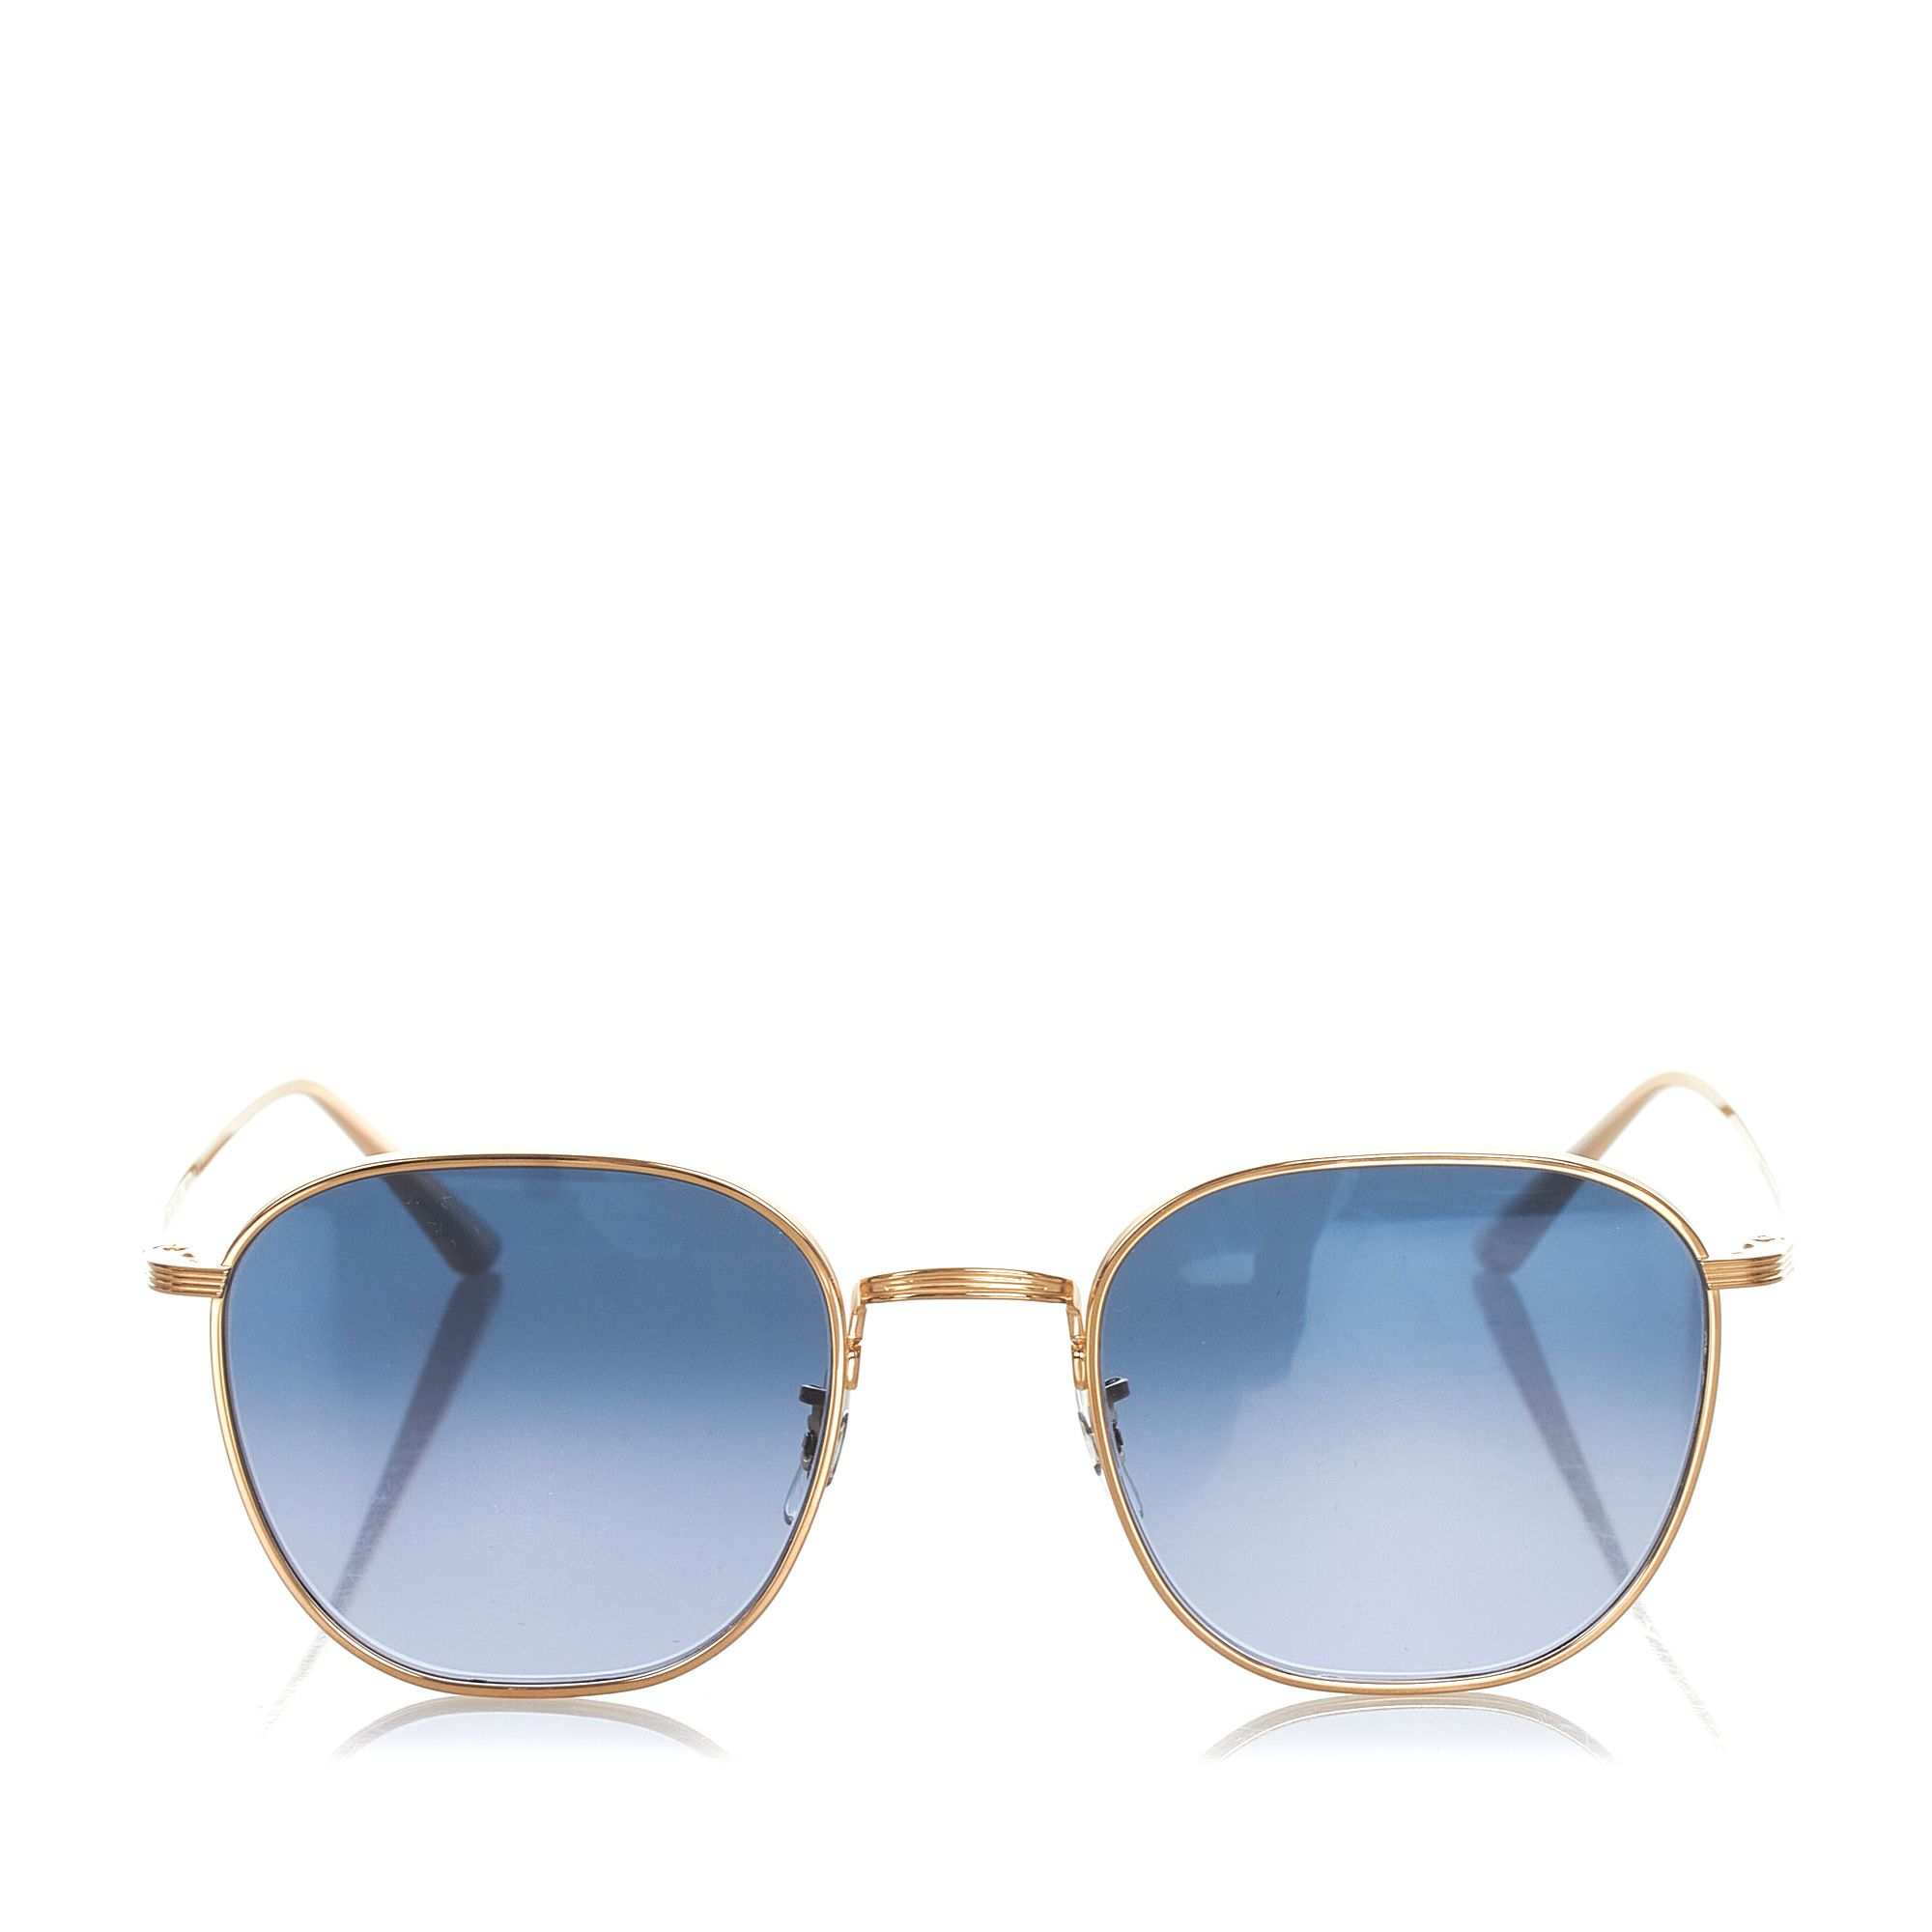 VINTAGE. RRP AS NEW. These sunglasses feature a metal body with tinted lenses.
Dimensions:
Length 4.3cm
Width 13cm

Original Accessories: Dust Bag

Color: Blue x Gold
Material: Metal x Others
Country of Origin: Japan
Boutique Reference: SSU118698K1342


Product Rating: VeryGoodCondition